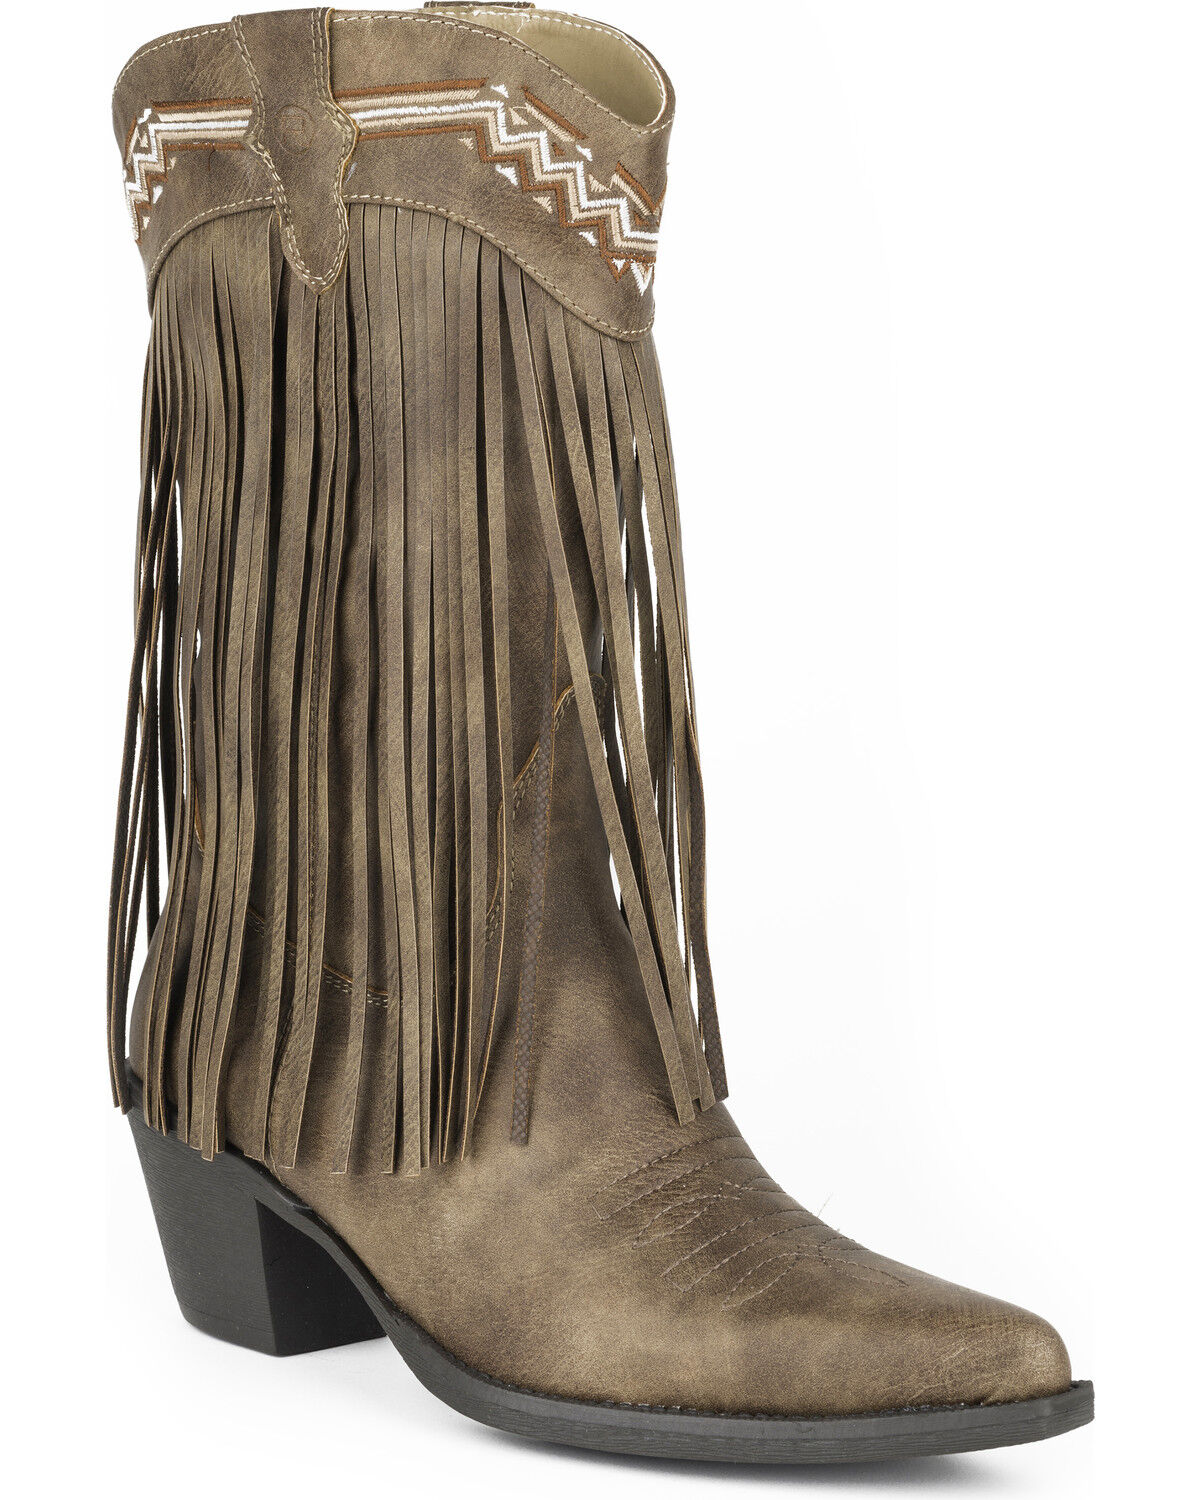 boots with fringes on them